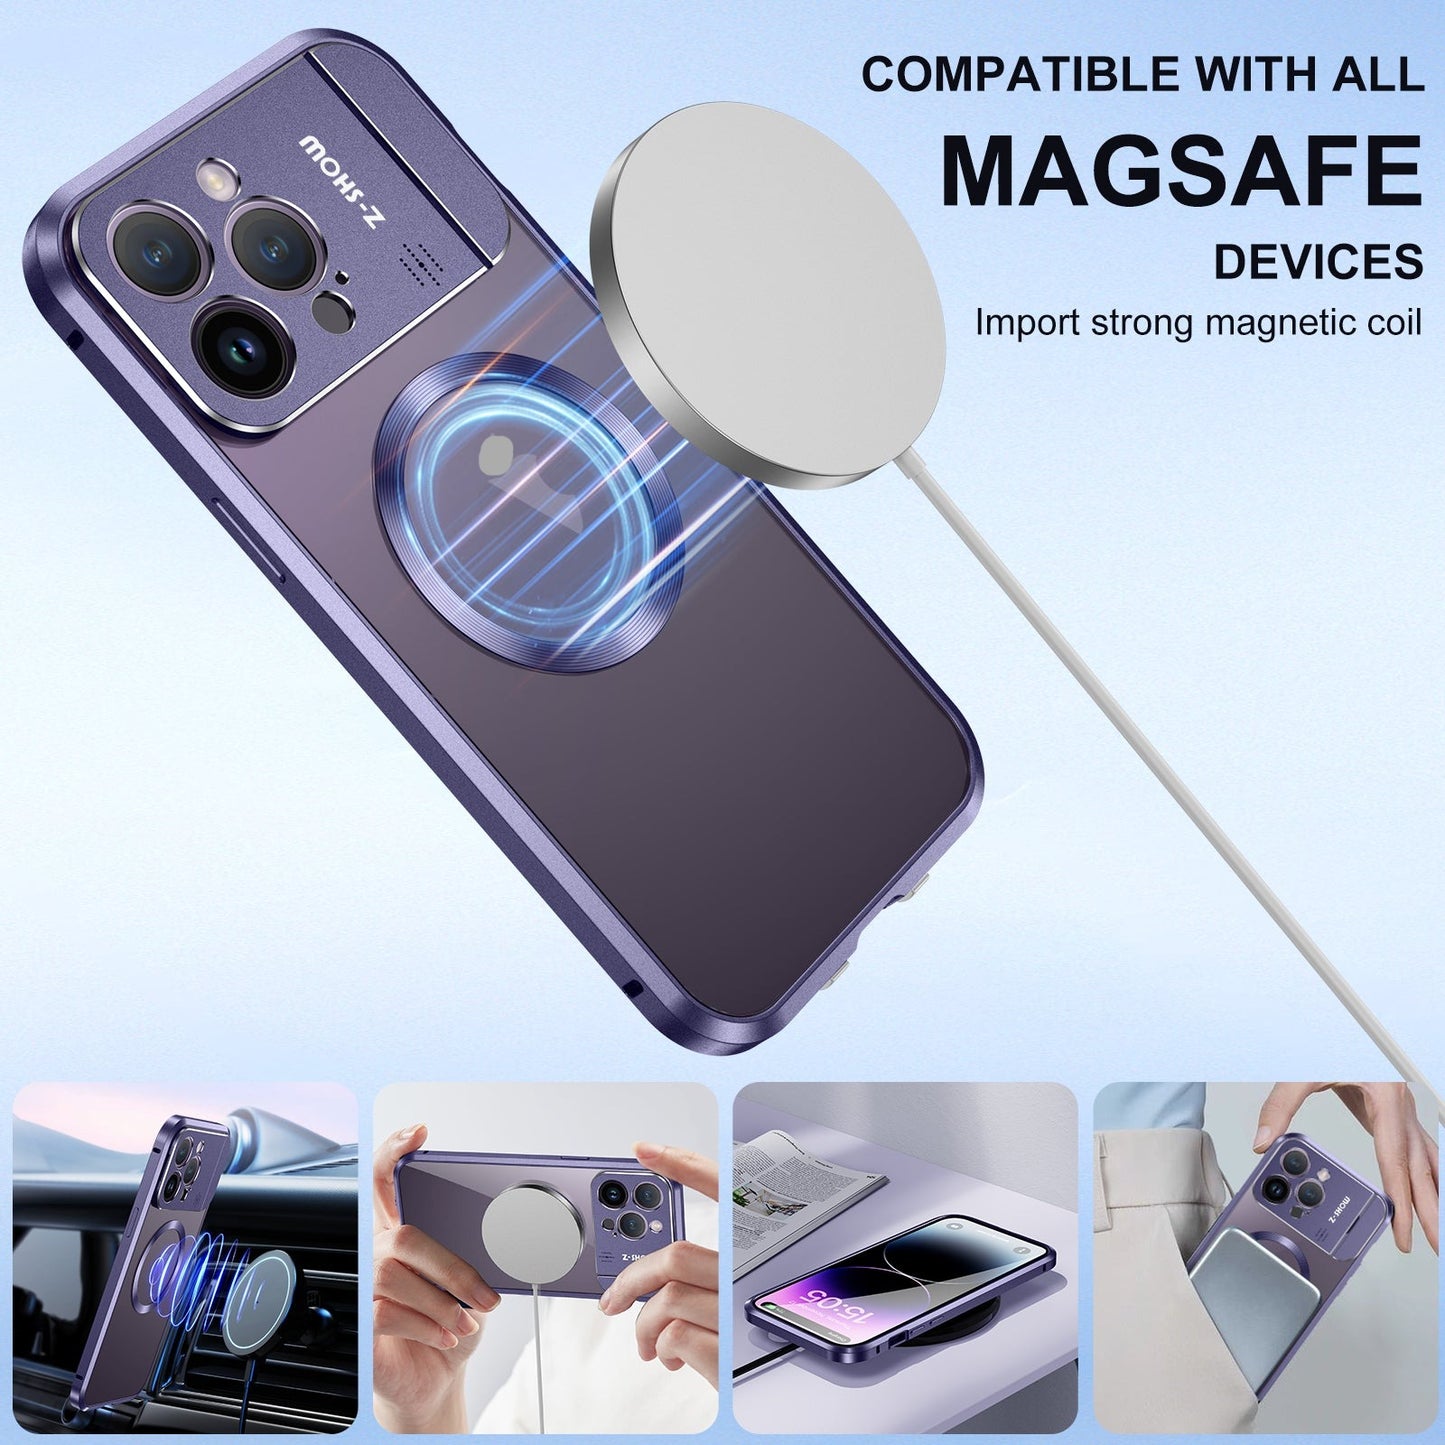 Luxury iPhone 14 Pro Max Magnetic Magsafe Case Fragrance Metal 13 Pro Cover Lens Protector Bracket